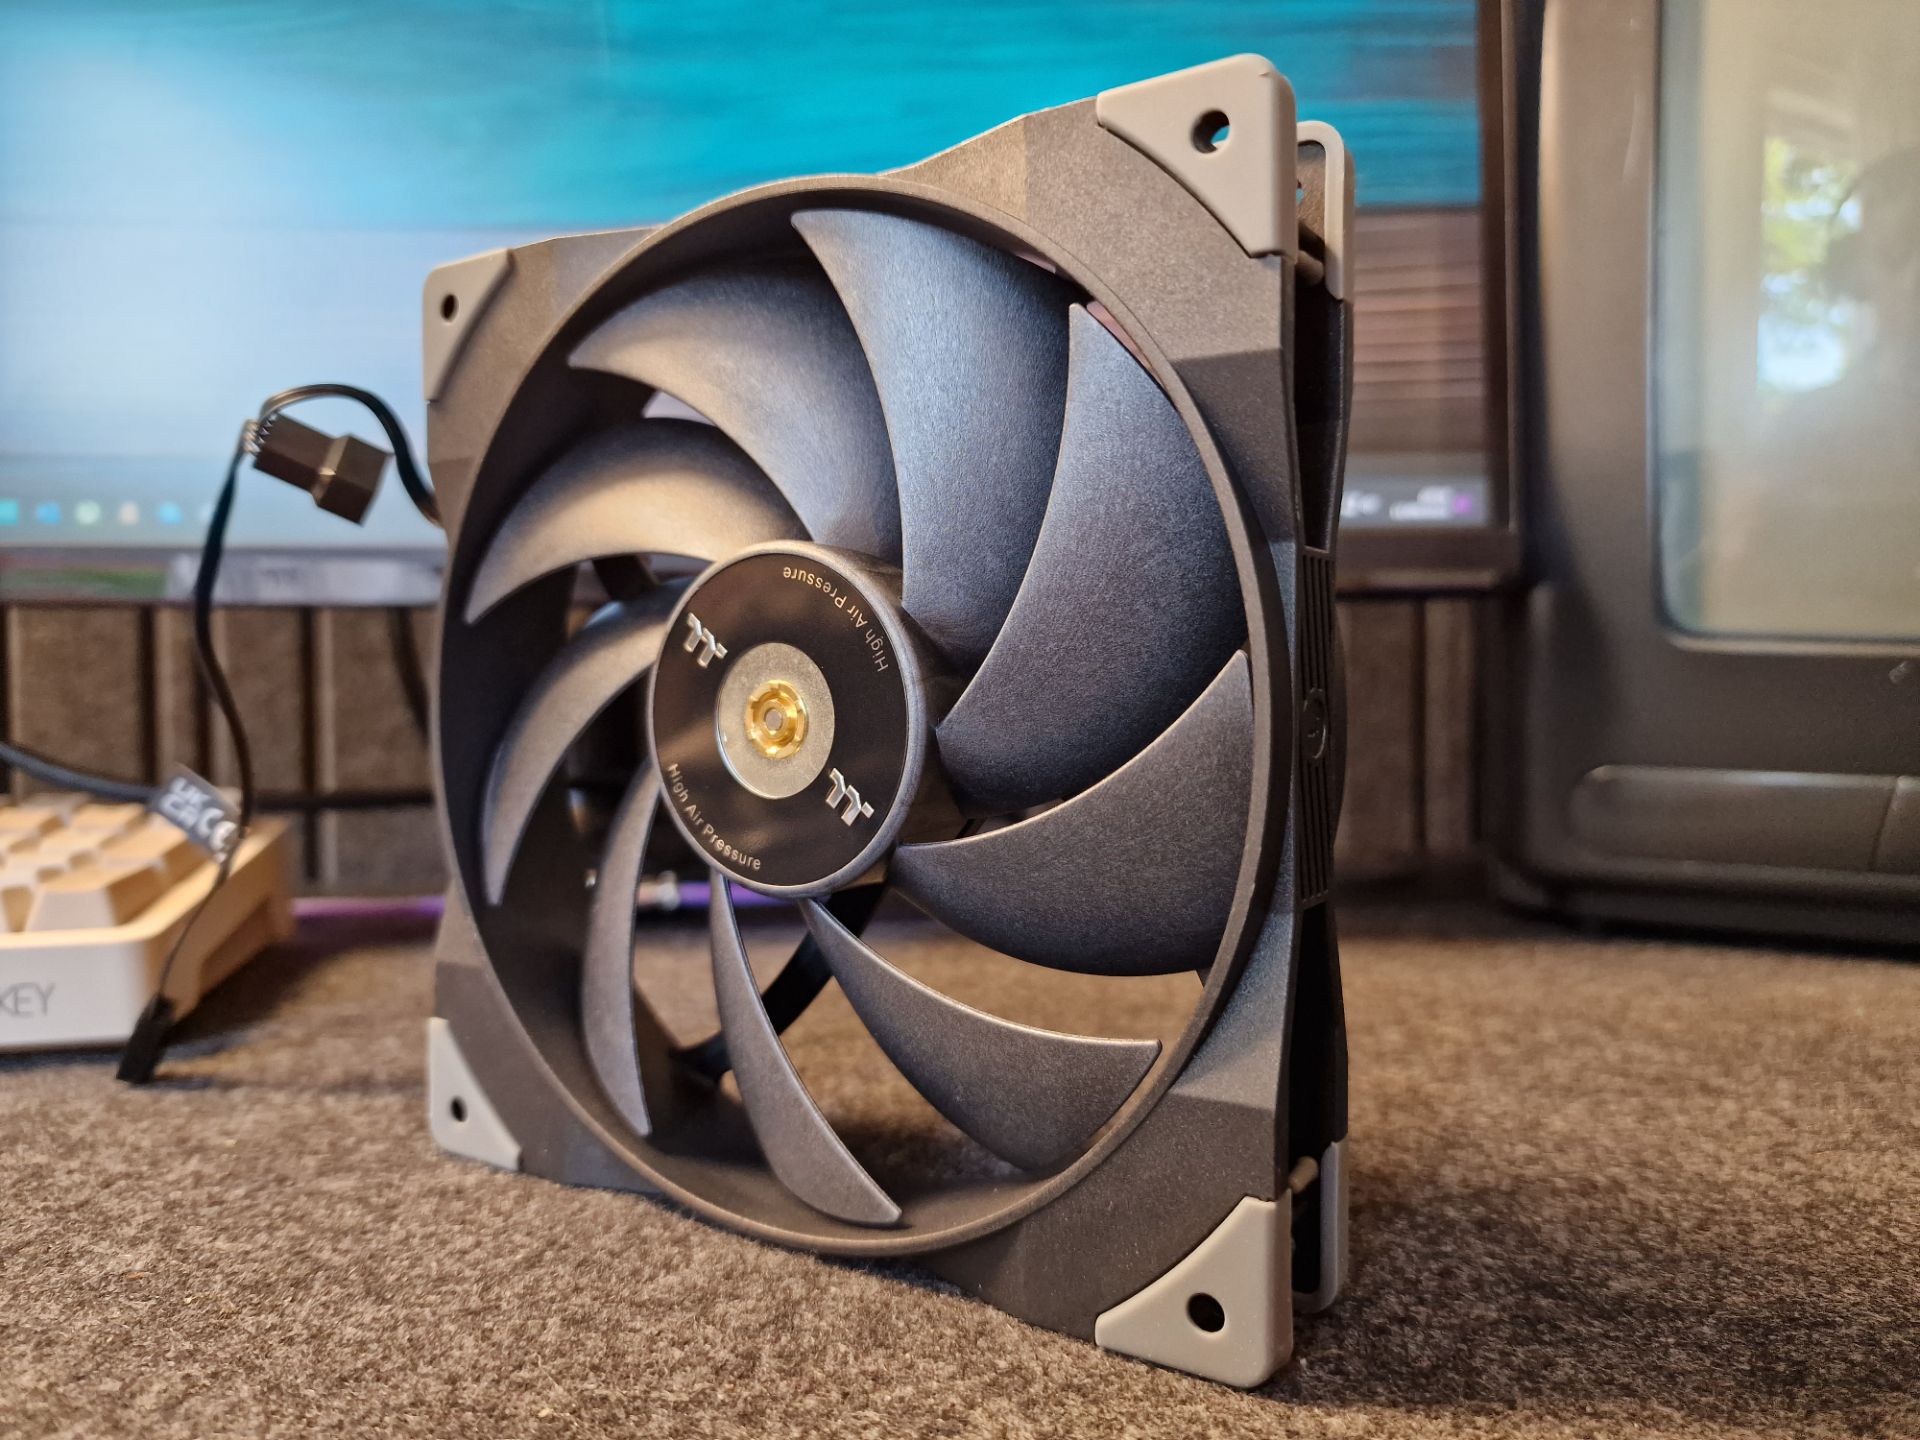 thermaltake swafan gt 14 pc cooling fans review 10 1